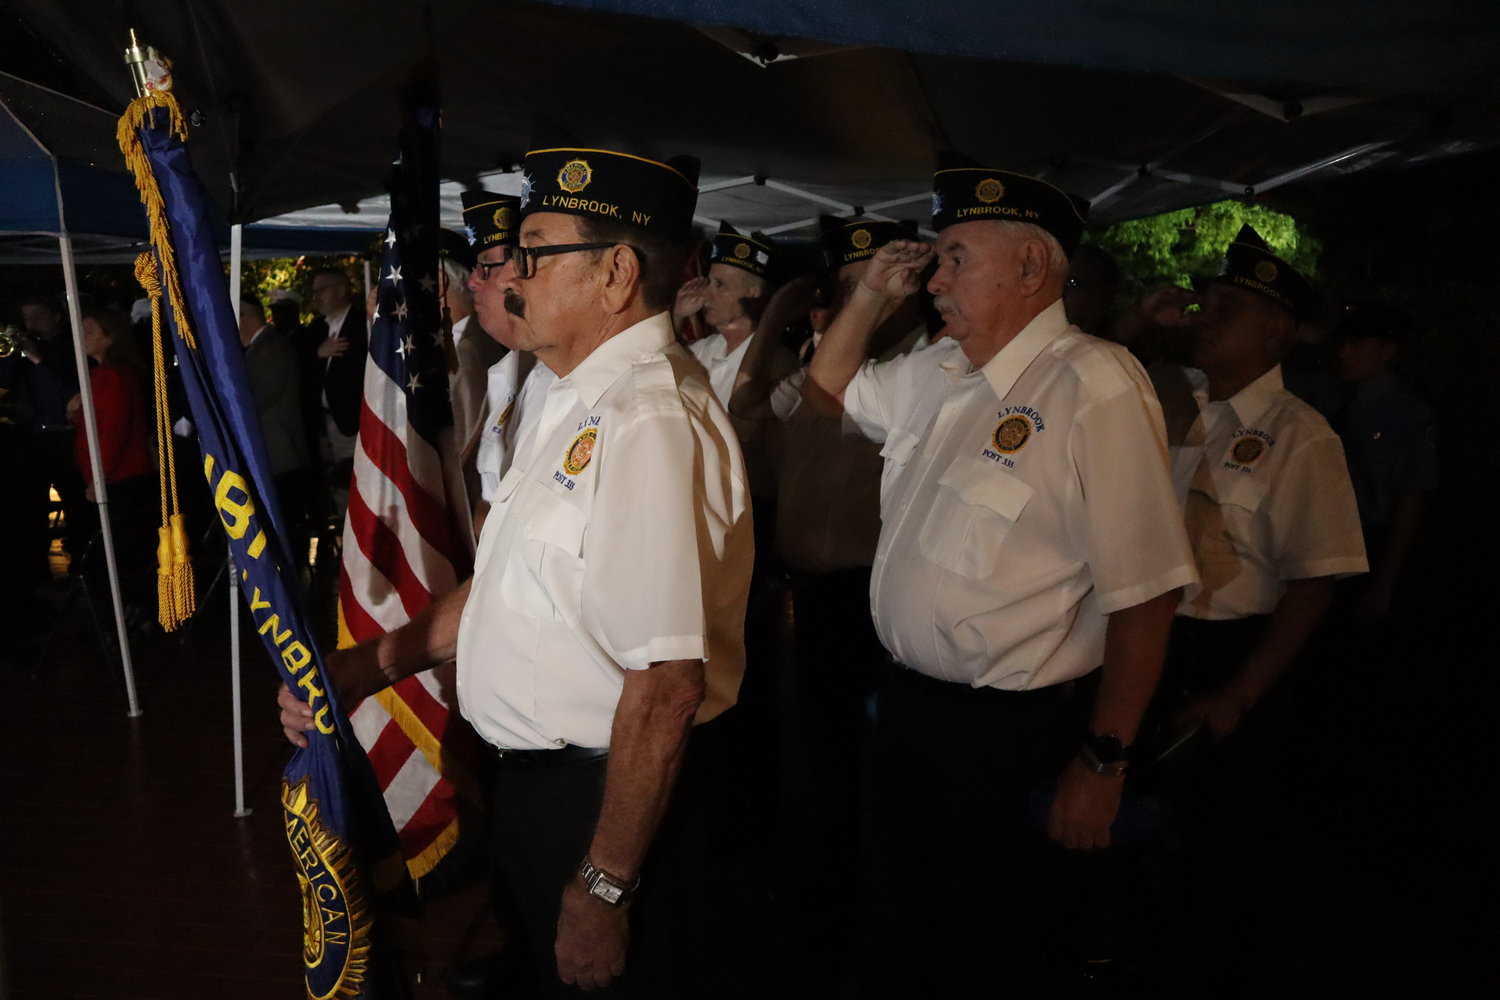 Members of Lynbrook American Legion Post No. 335 present the colors to start the ceremony on Sunday night